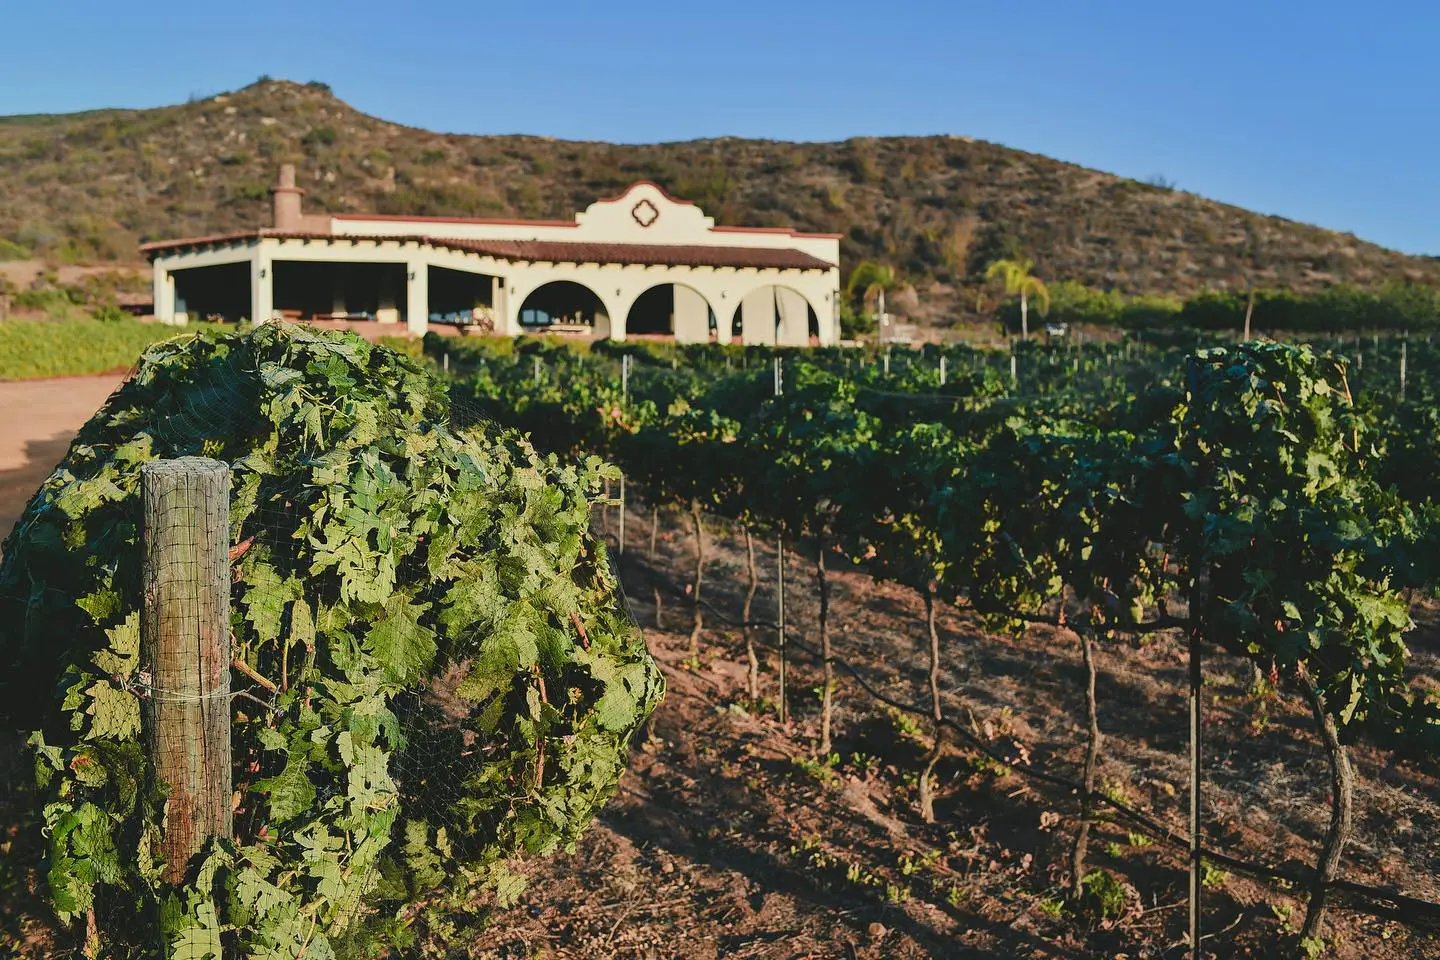 A vineyard with vines growing in the foreground and a house on the hill.